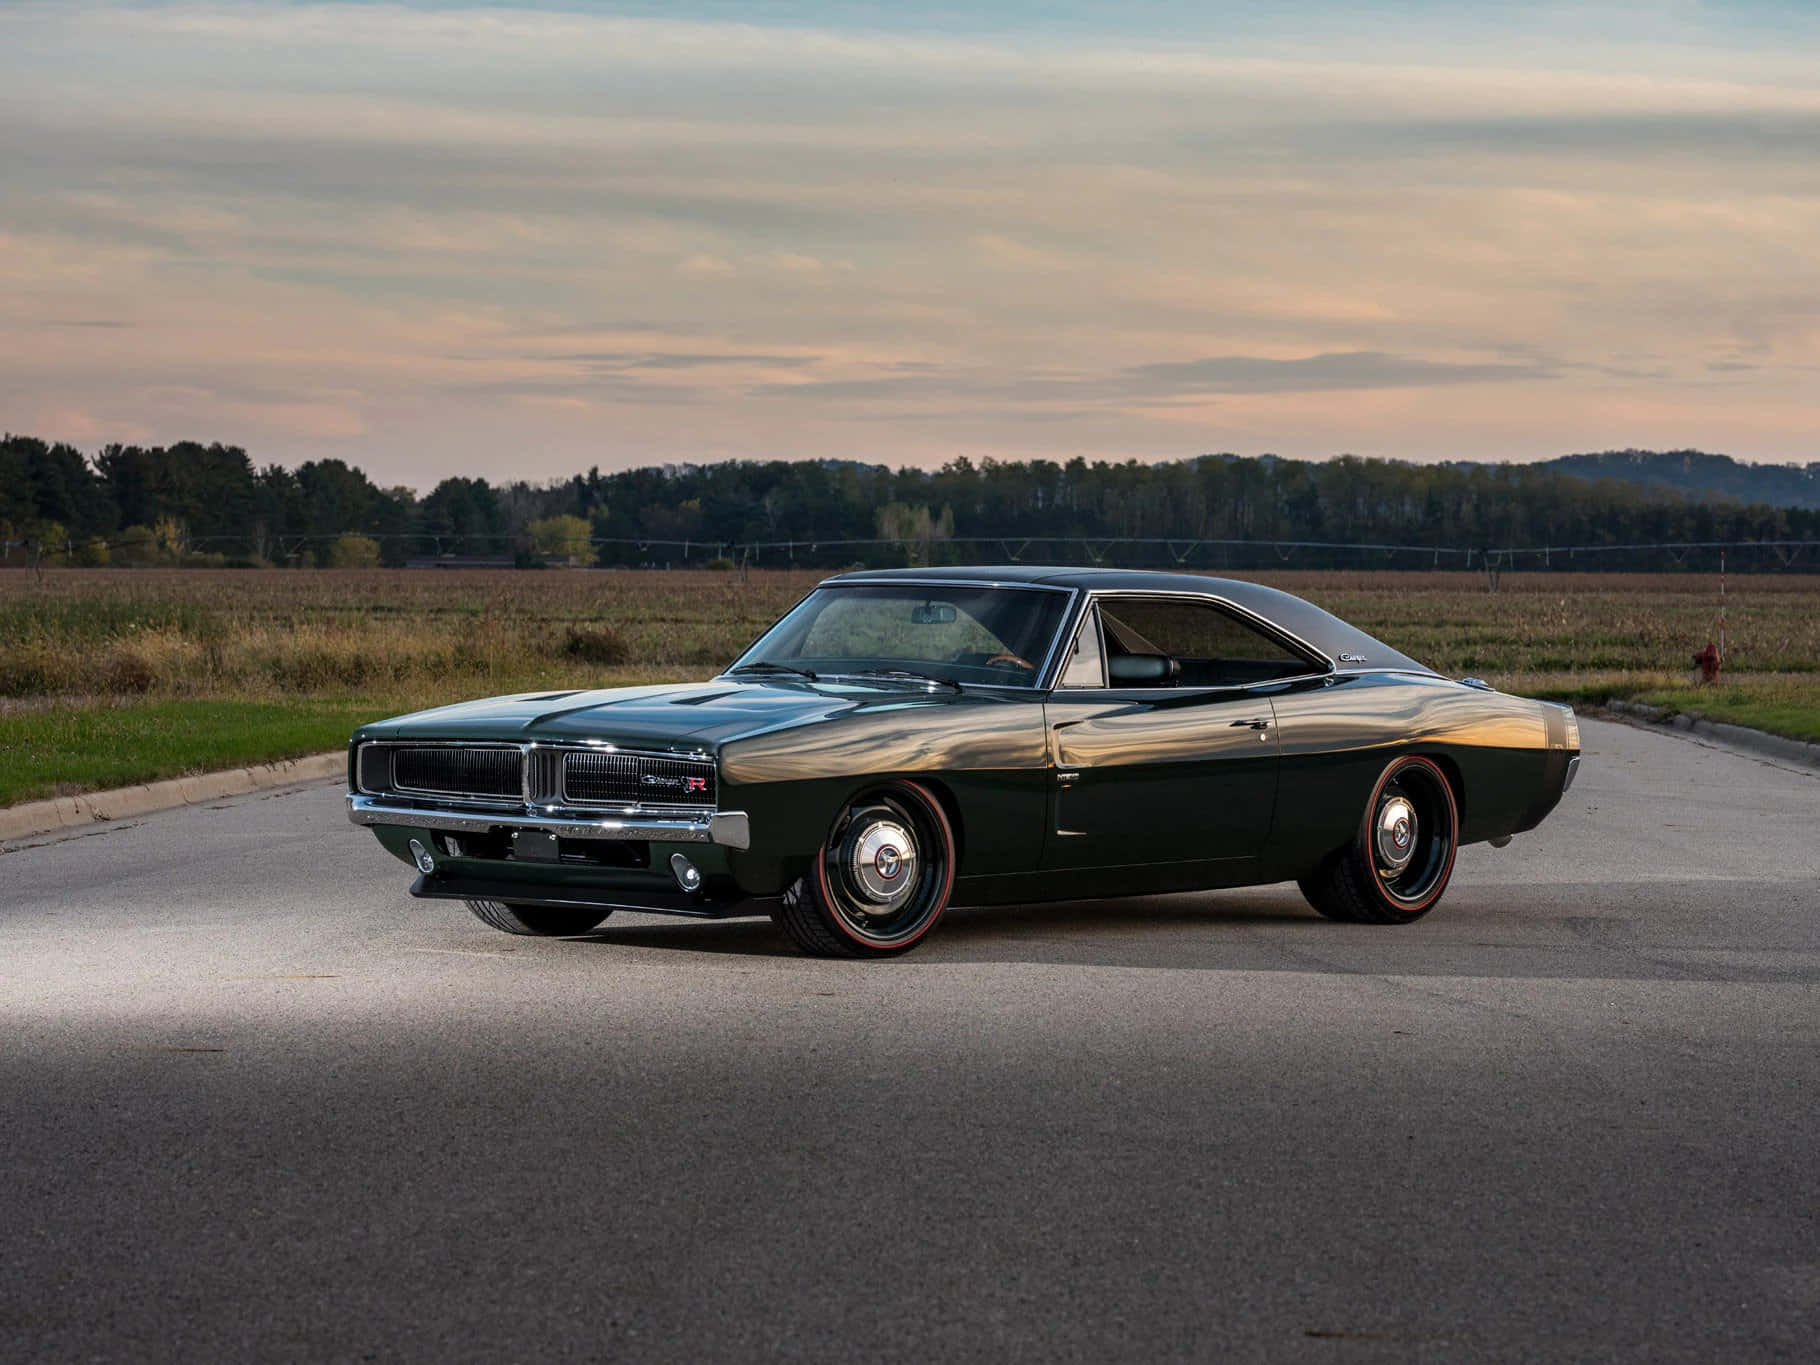 A Green Muscle Car Is Parked On The Road